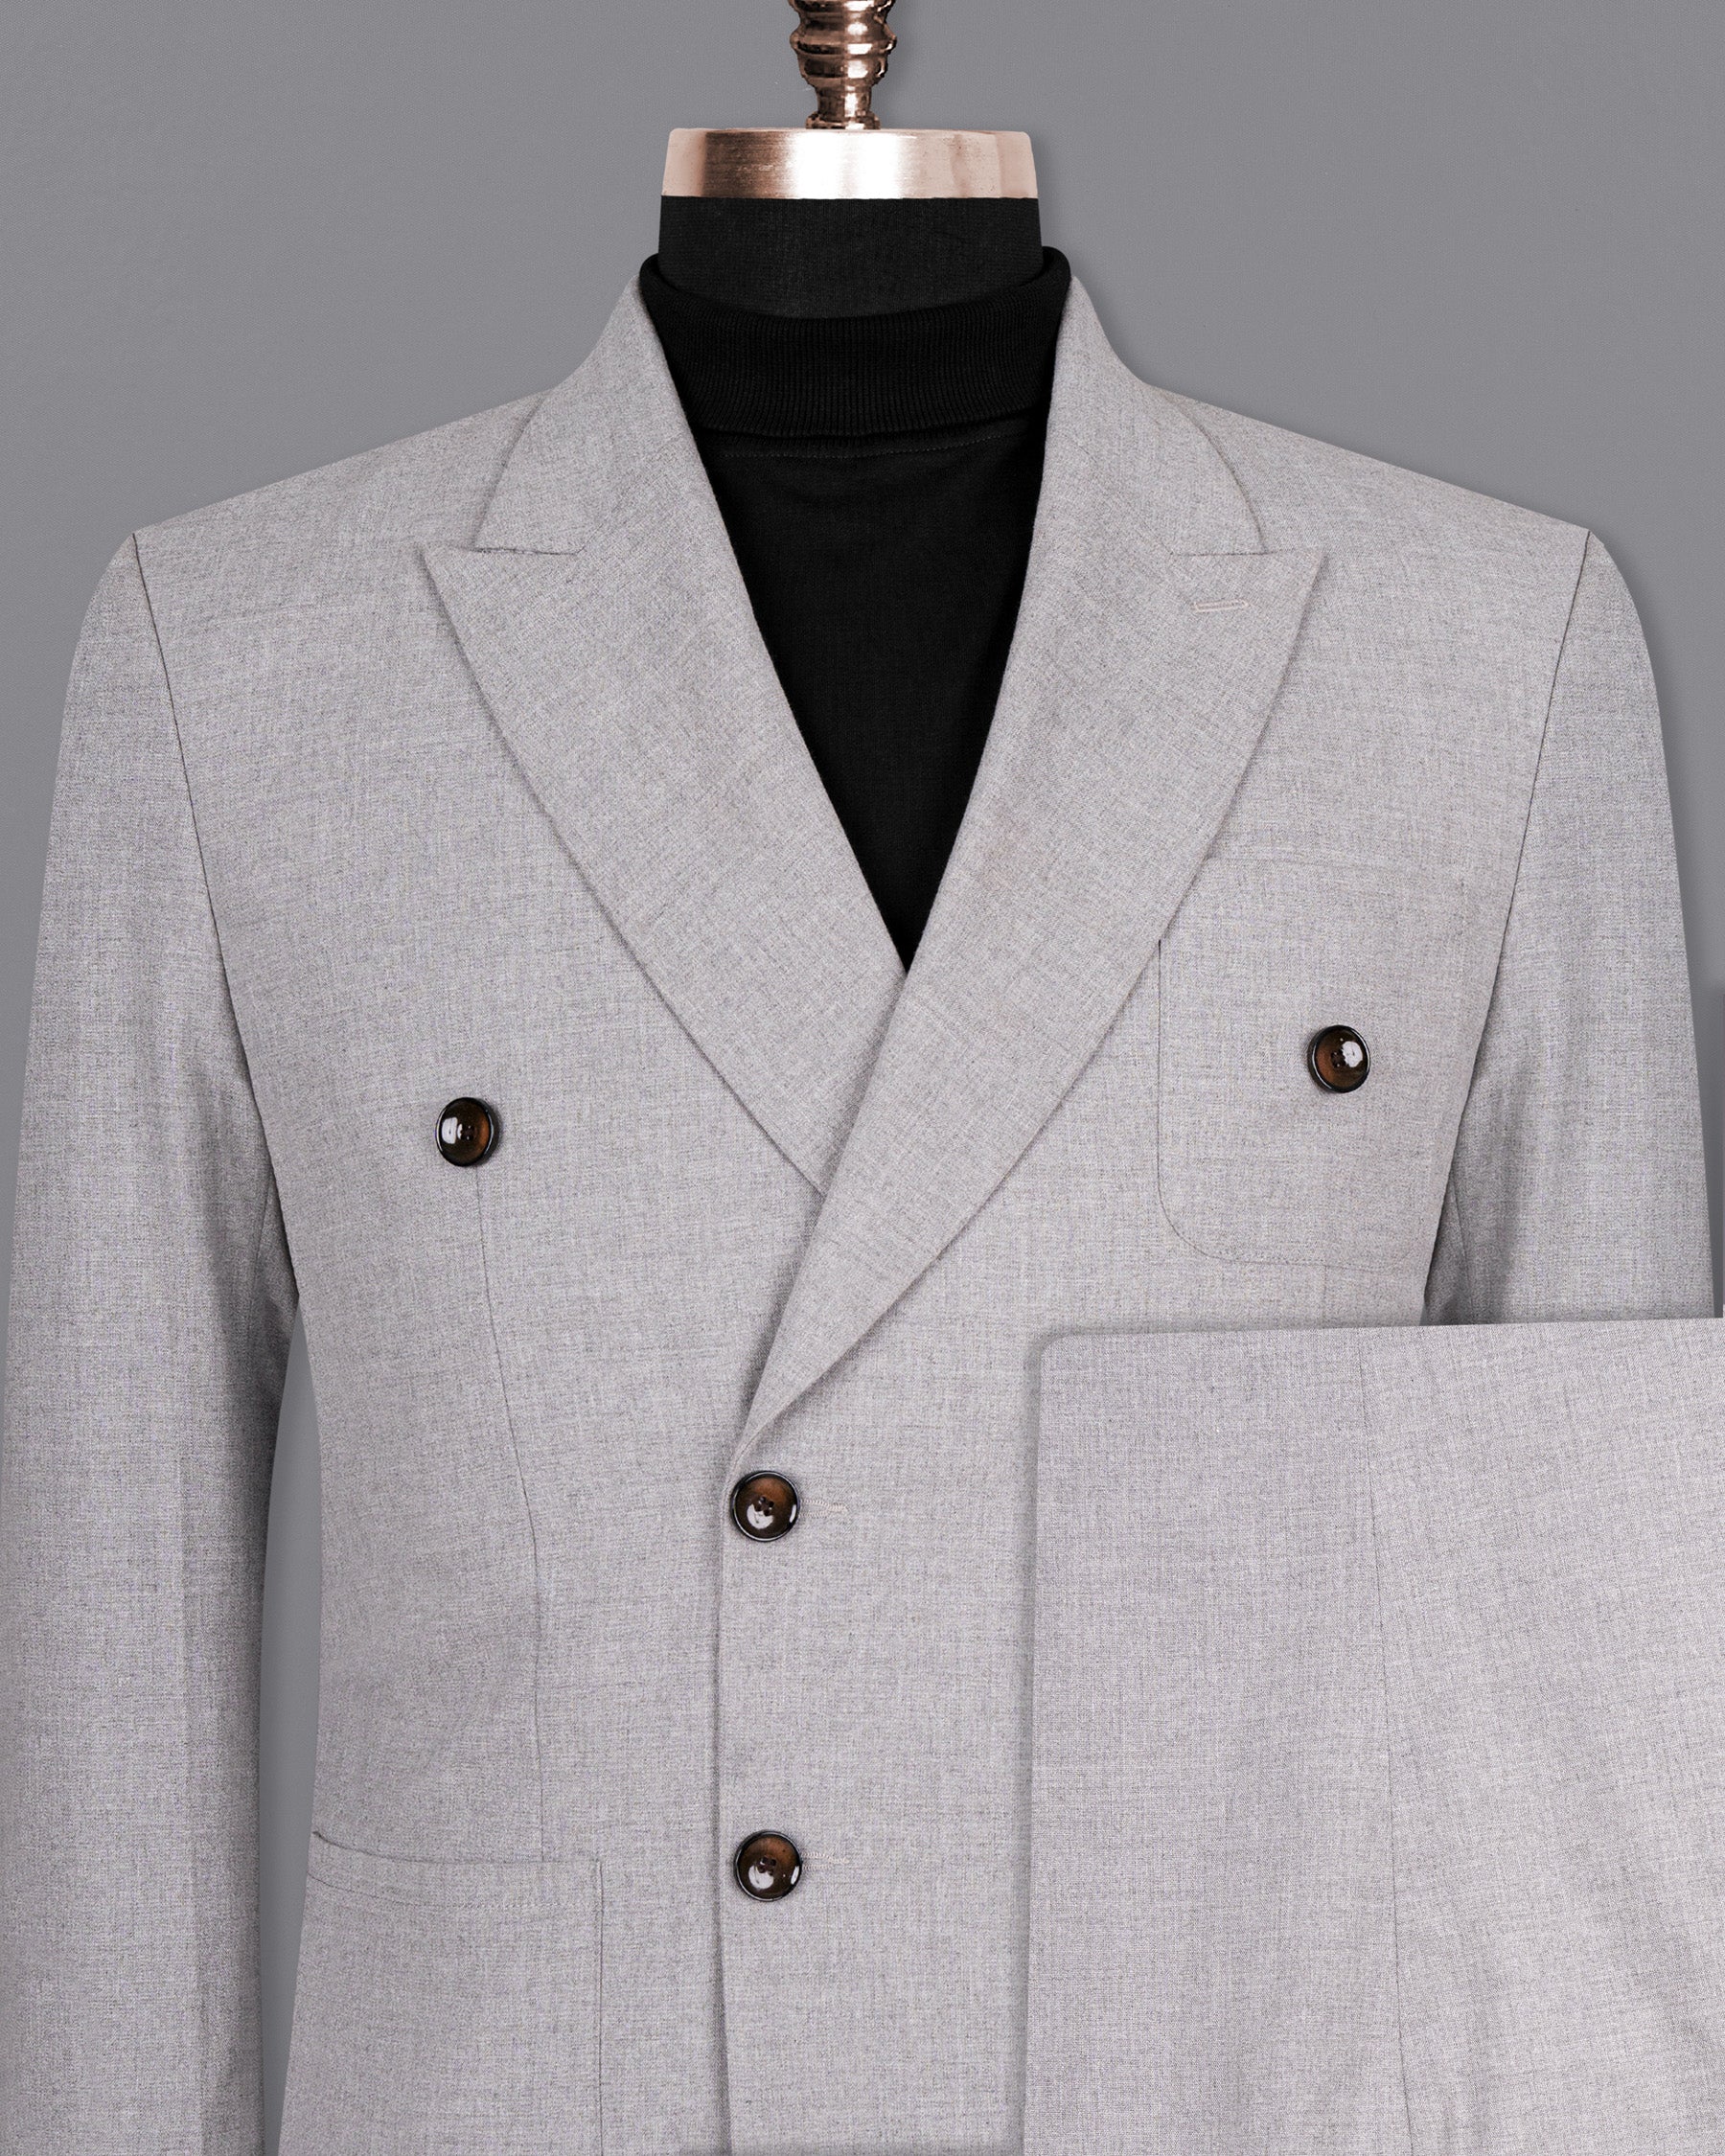 French Gray DouSTe-Breasted Wool Rich Sport Suit ST1495-DB-PP-36, ST1495-DB-PP-38, ST1495-DB-PP-40, ST1495-DB-PP-42, ST1495-DB-PP-44, ST1495-DB-PP-46, ST1495-DB-PP-48, ST1495-DB-PP-50, ST1495-DB-PP-52, ST1495-DB-PP-54, ST1495-DB-PP-56, ST1495-DB-PP-58, ST1495-DB-PP-60